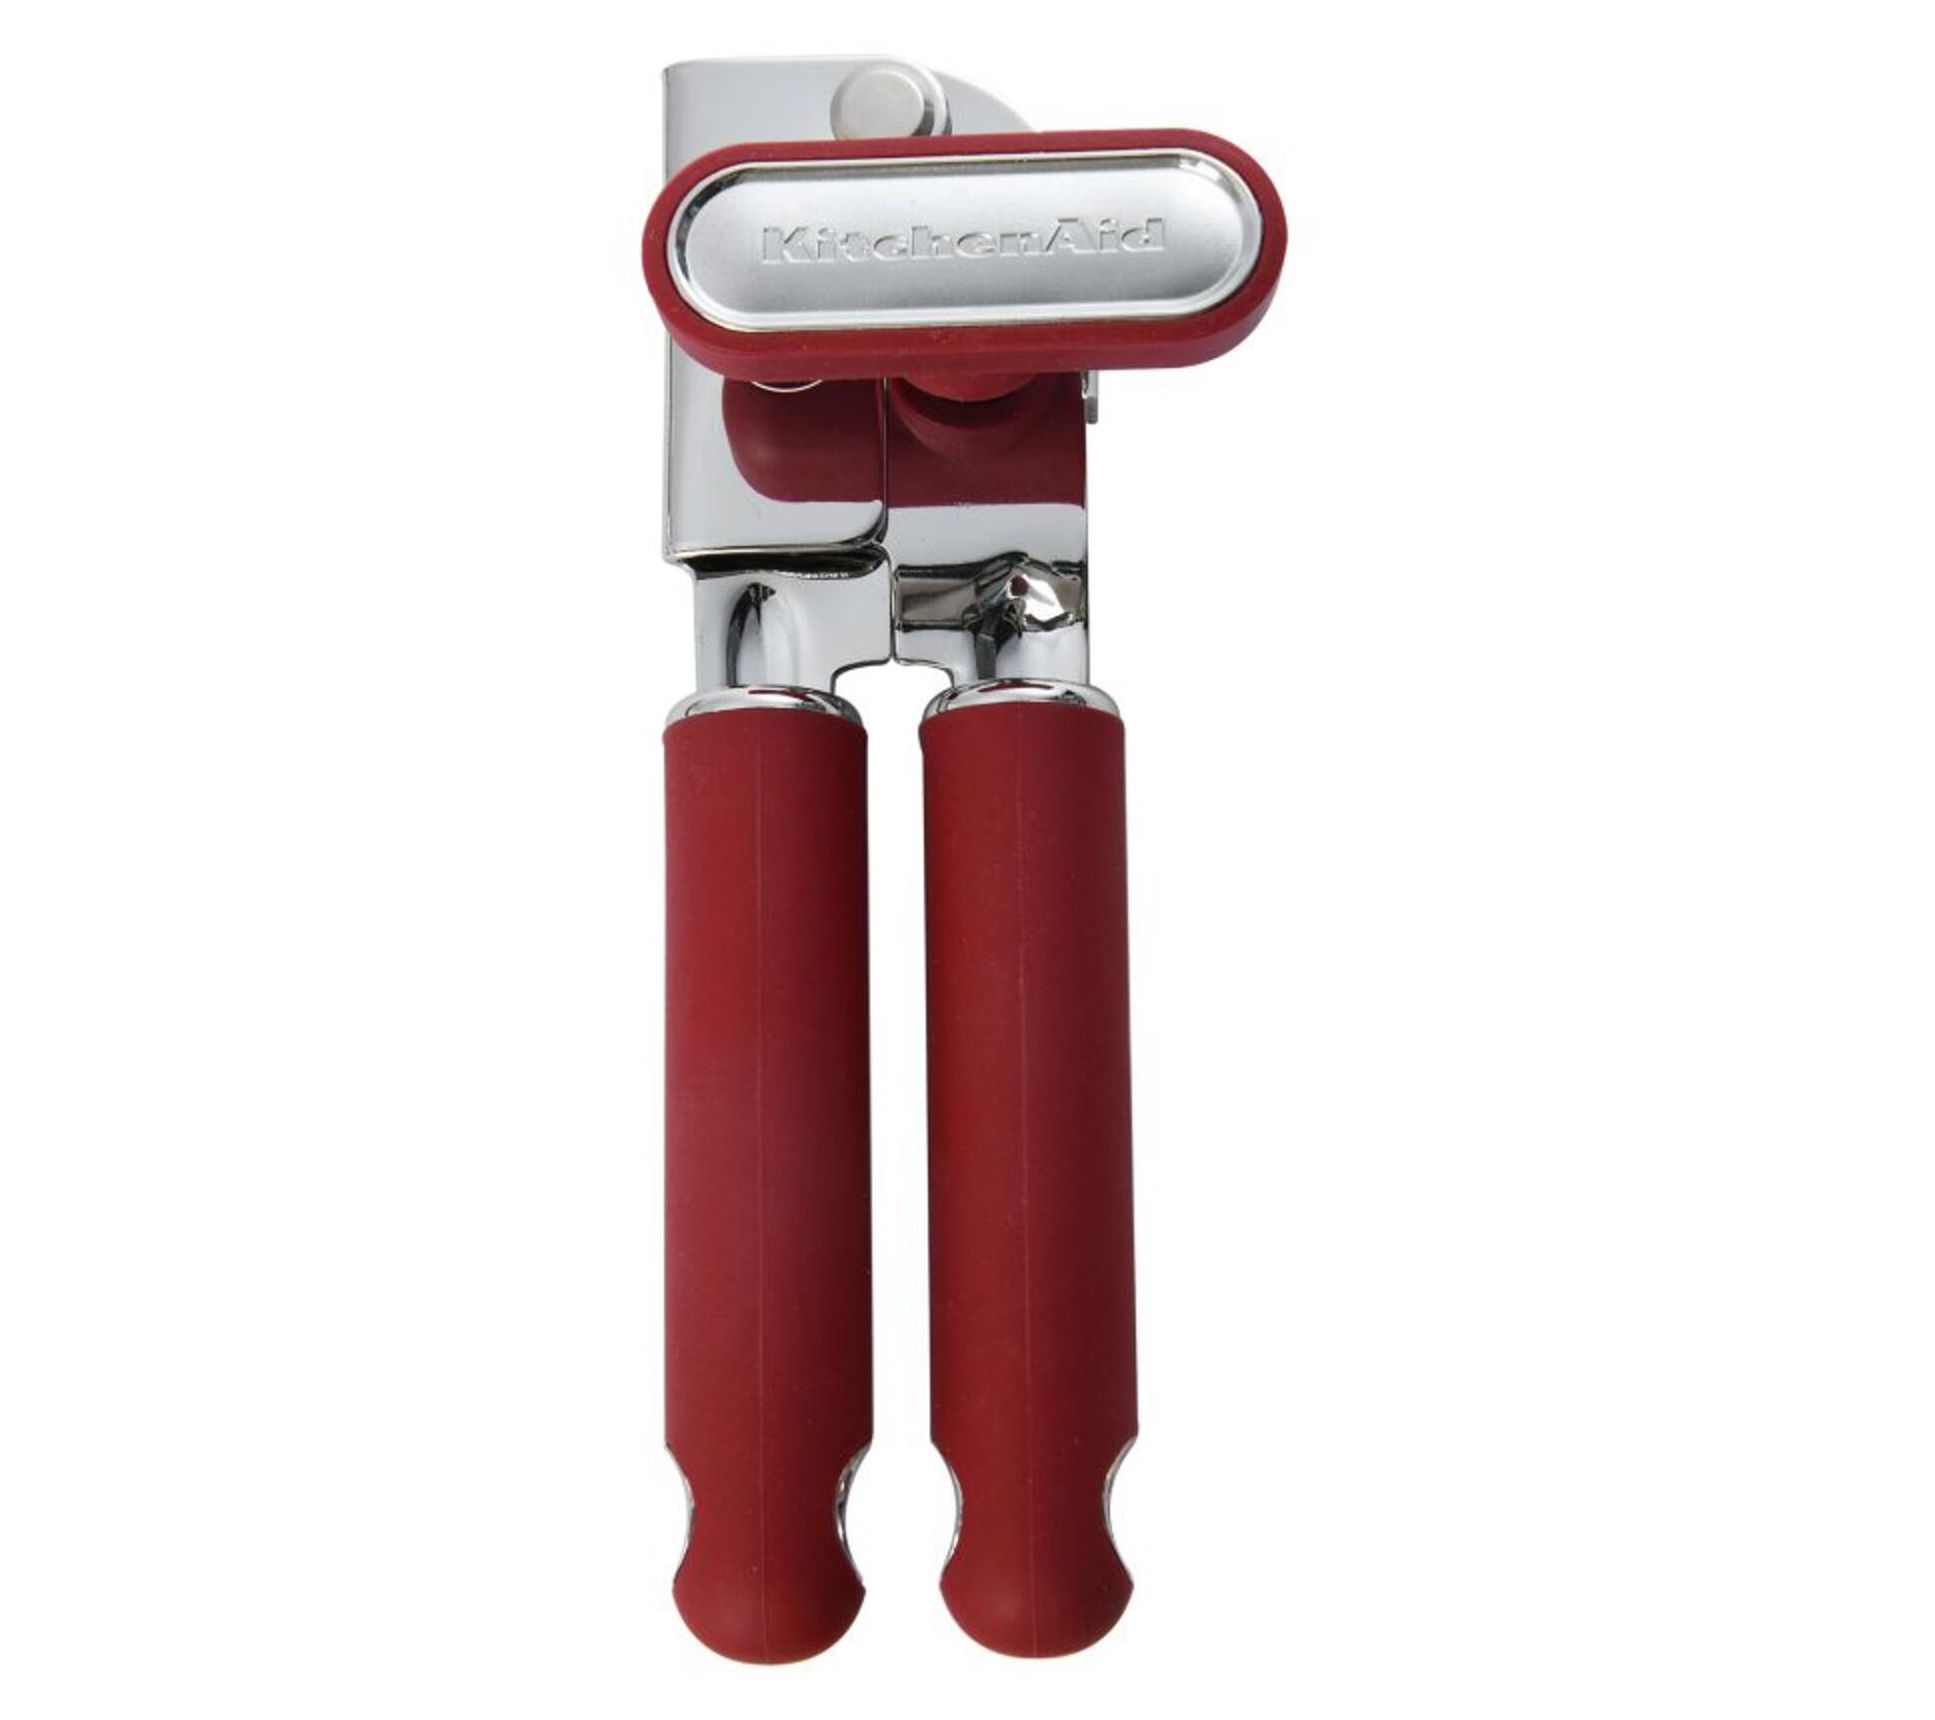 Kuhn Rikon 5-in-1 Master Auto Safety Can Opener on QVC 